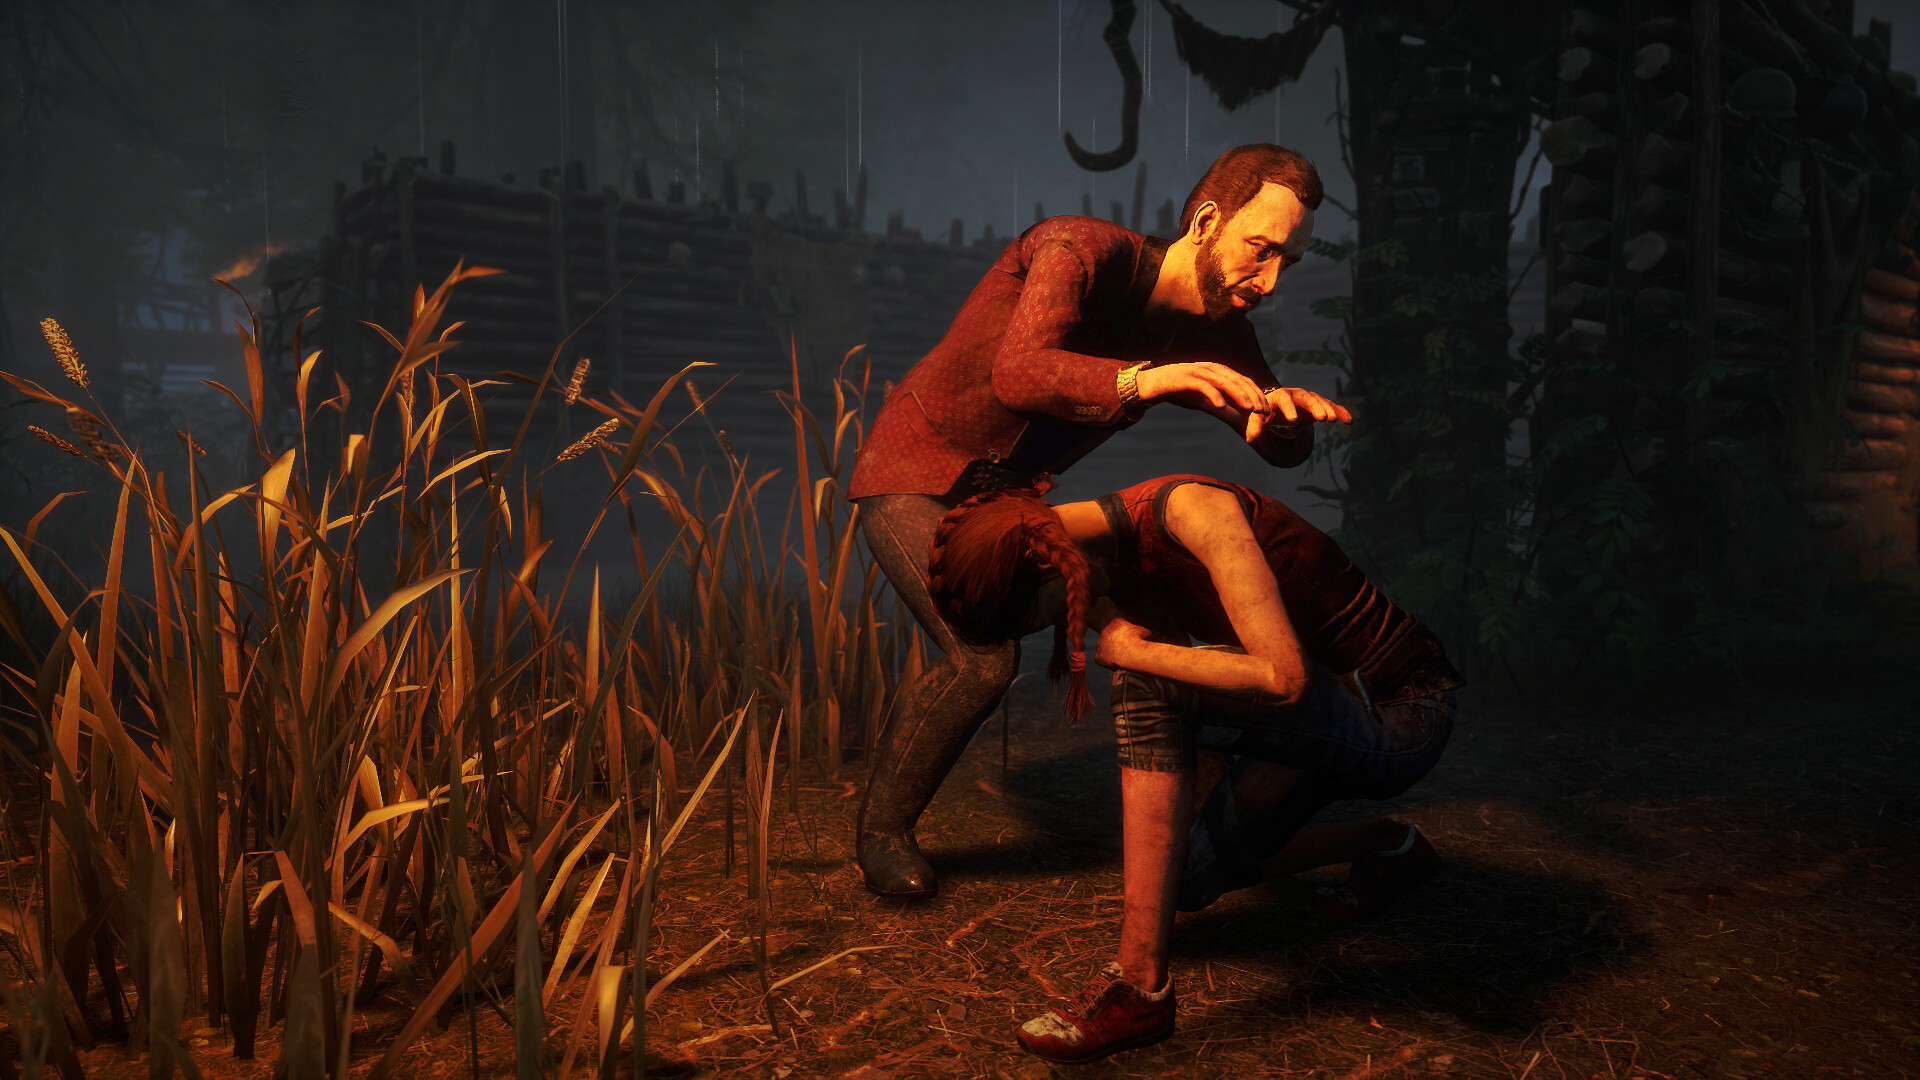 Dead By Daylight - Nicolas Cage Chapter Pack DLC AR XBOX One / Xbox Series X,S CD Key